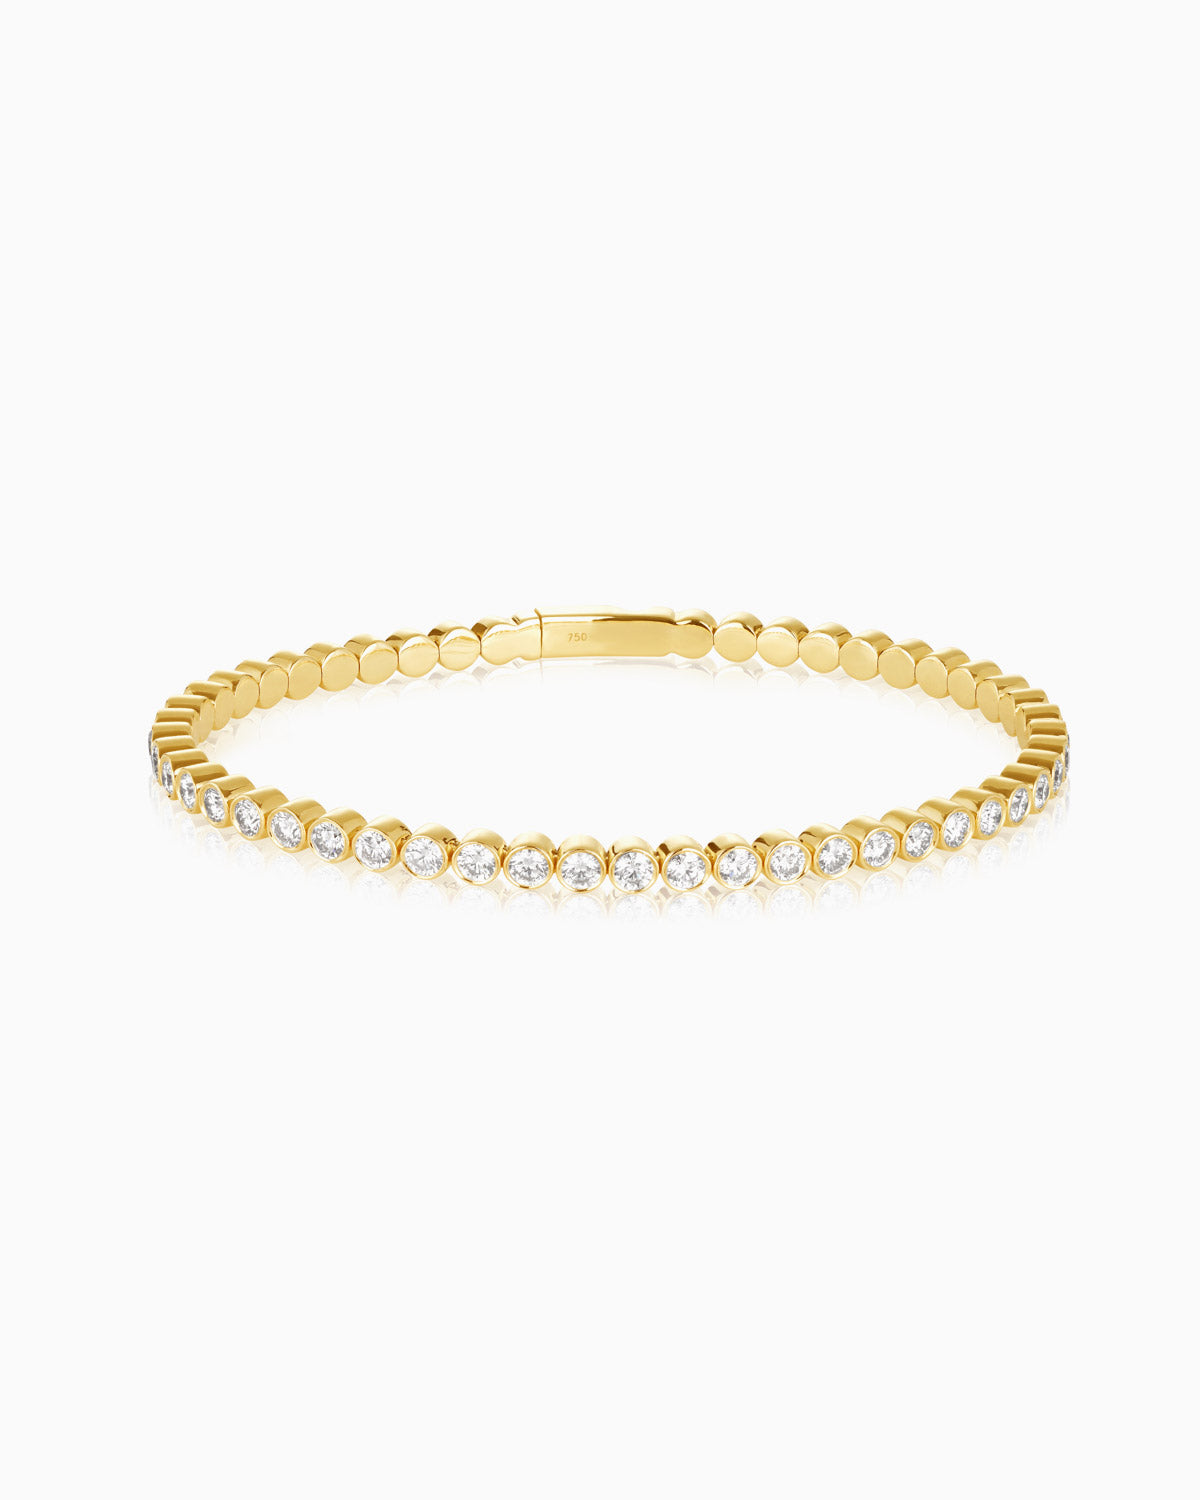 Buy Peruviana Bloom Bracelet In Antique Gold Plated 925 Silver from Shaya  by CaratLane